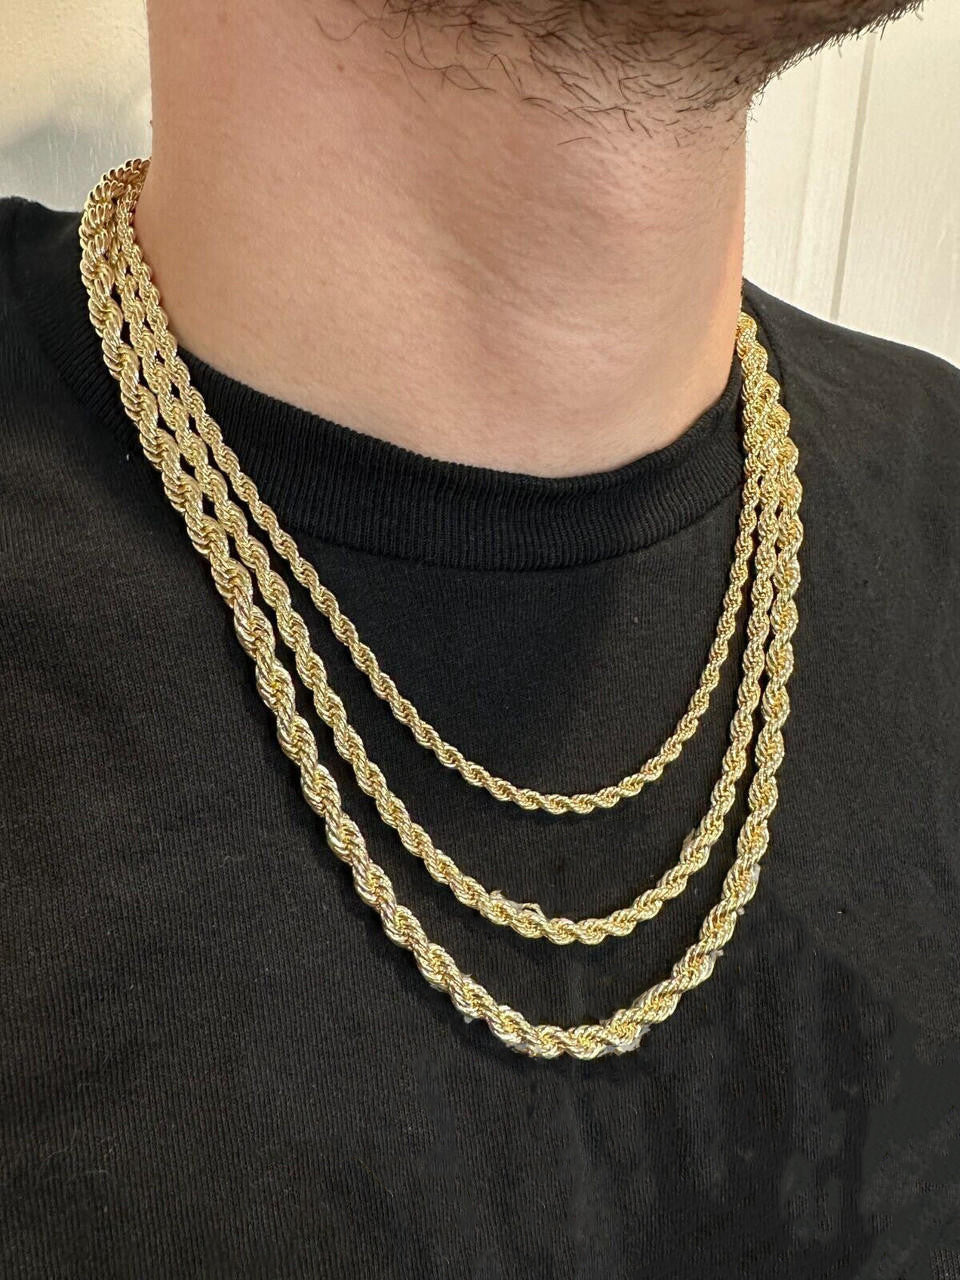 14k Gold Rope Chain Necklace For Men's 4-6mm With Moissanite Clasp